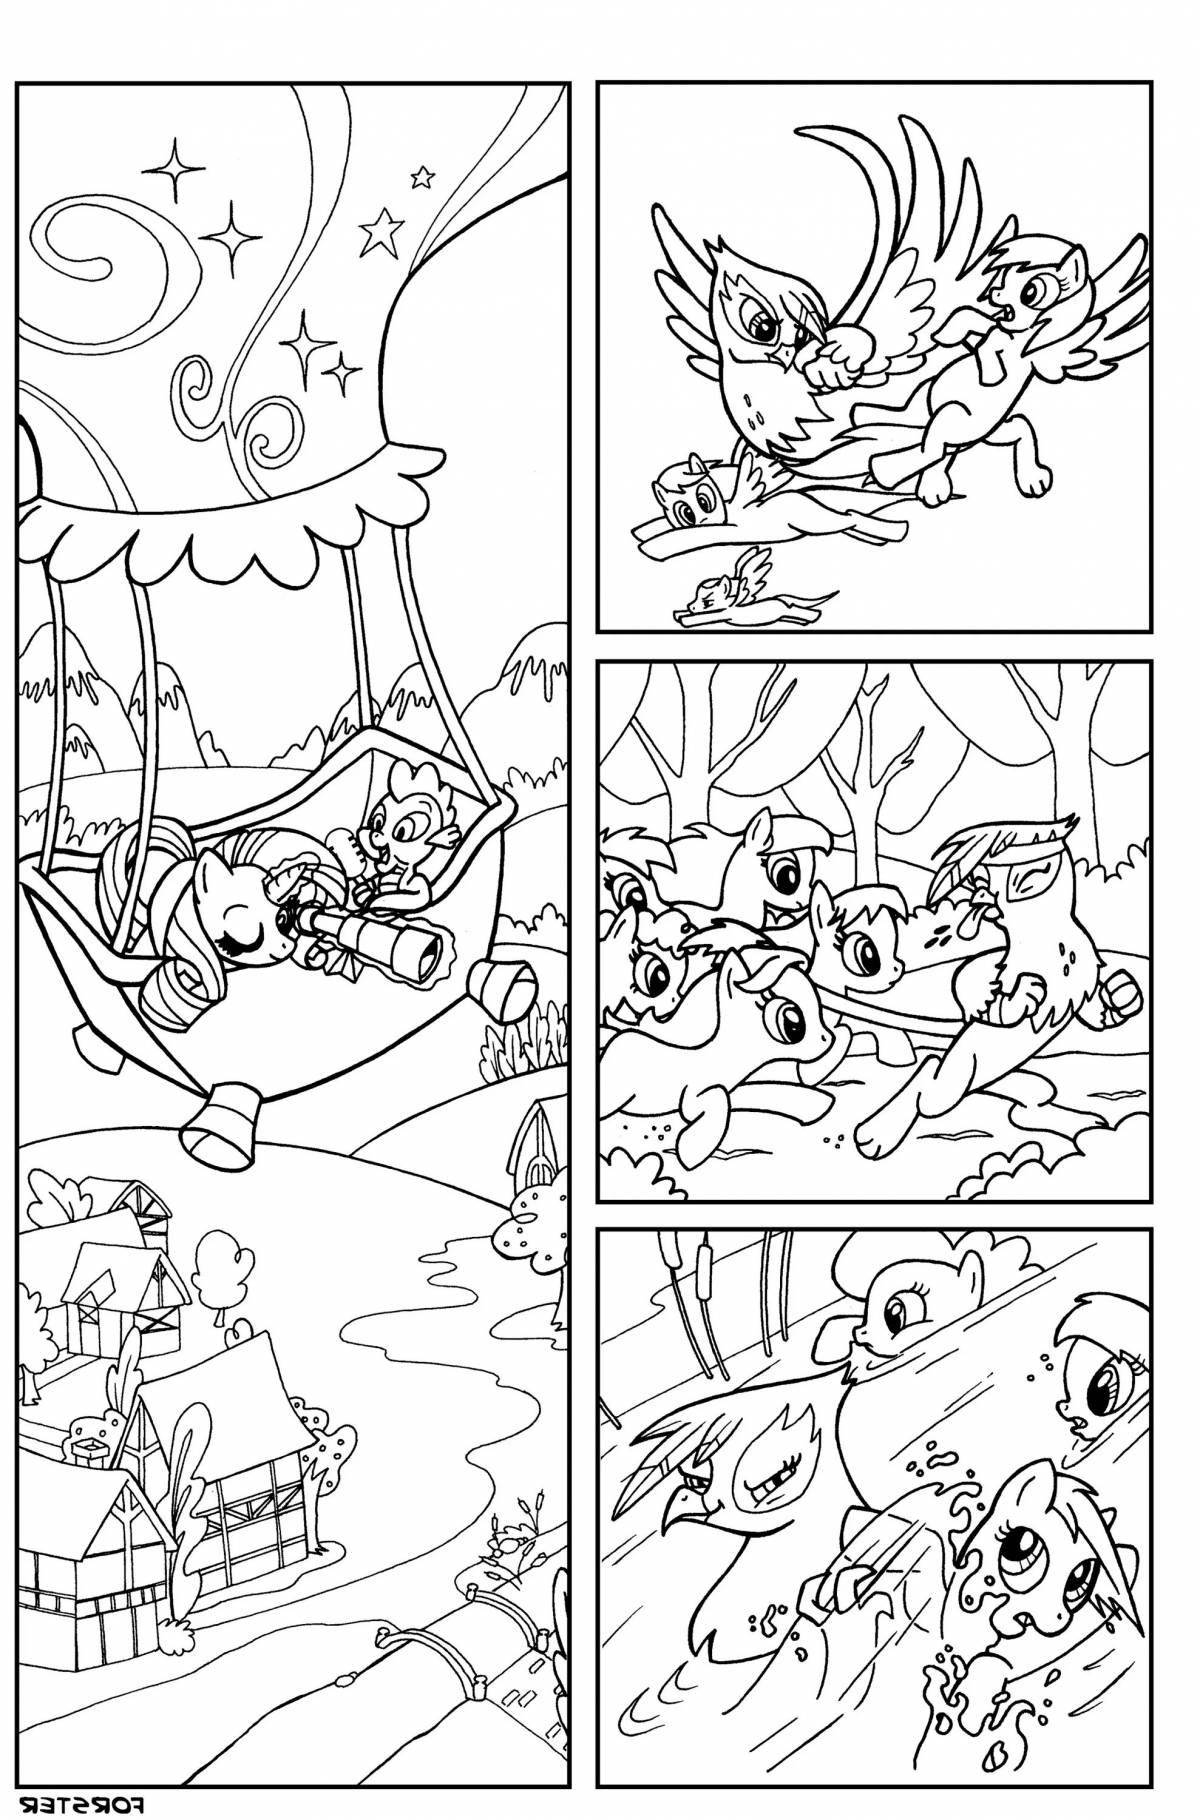 Adorable Comic Coloring Book for Girls